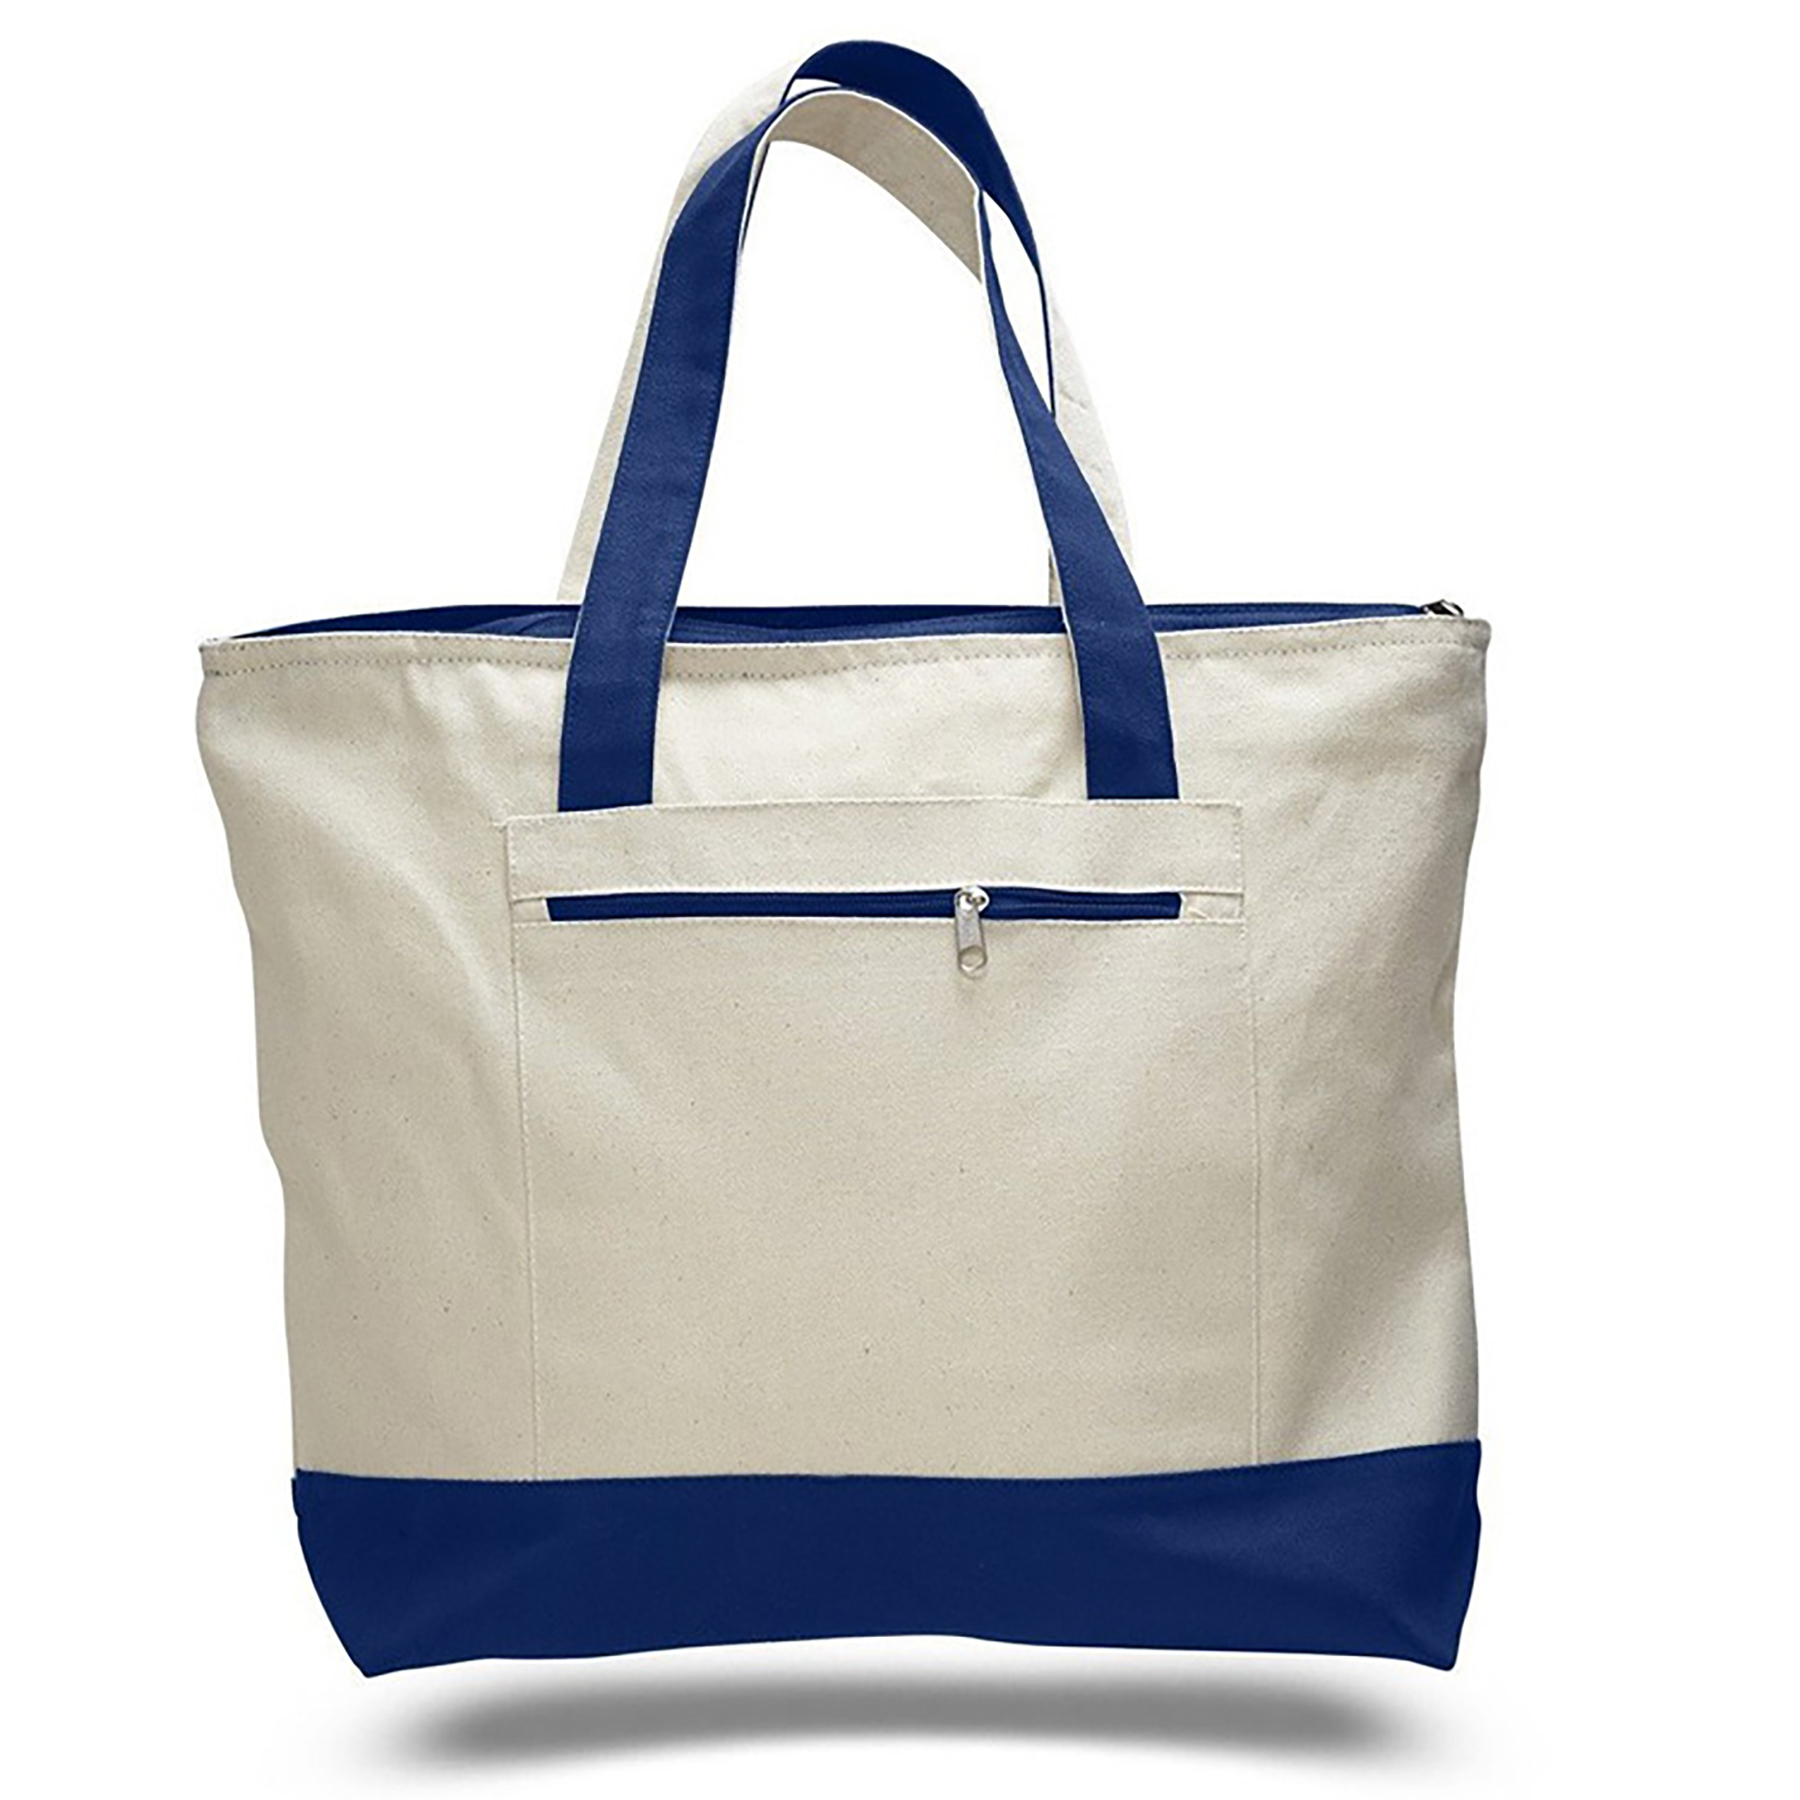 Zipper Sturdy Canvas Tote Bags for Beach/Work/ Travel/ Shopping